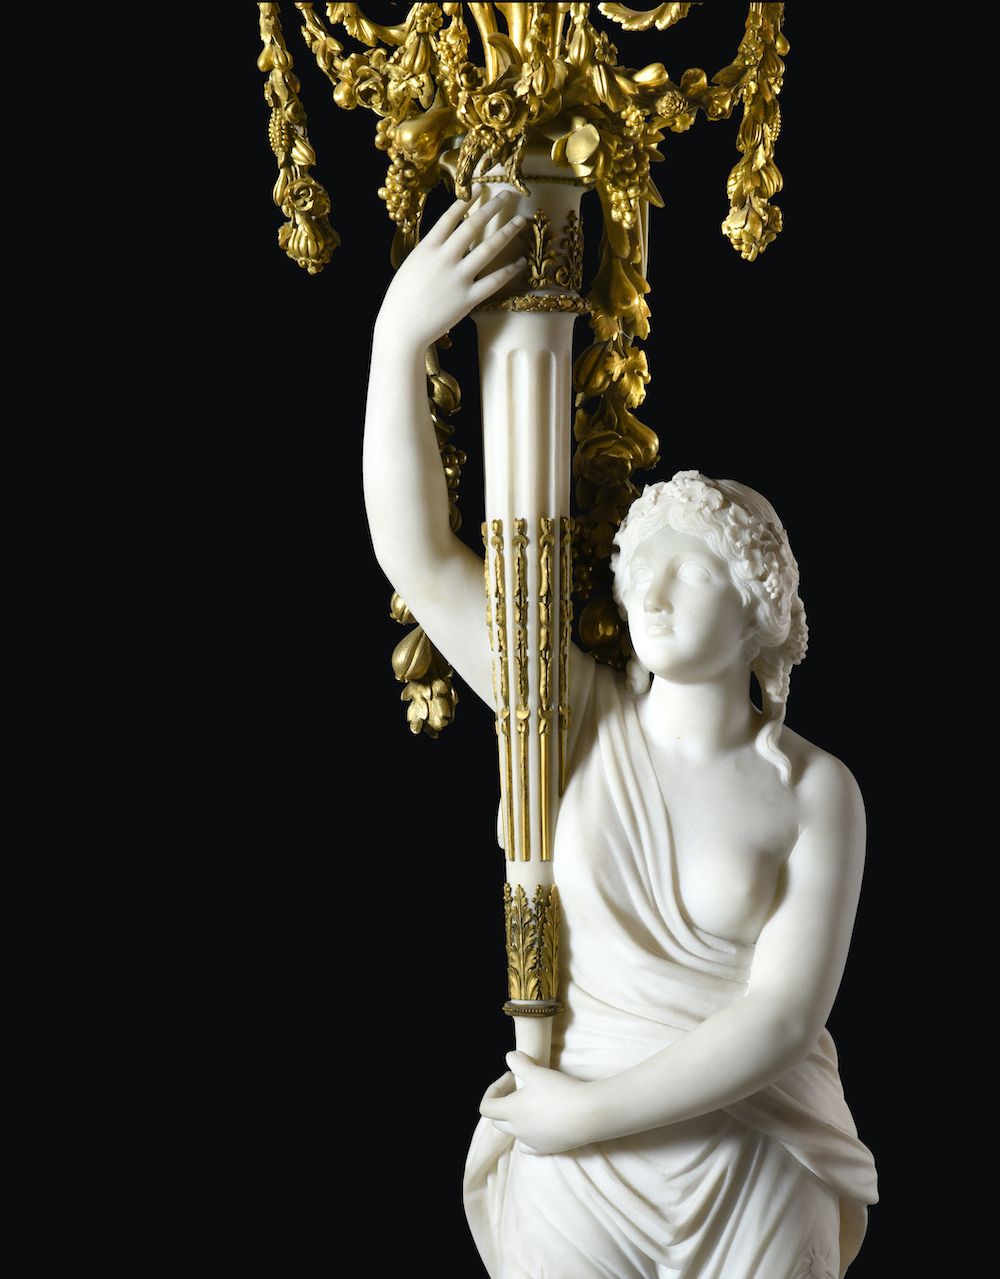 pair of French ormolu-mounted white marble and porphyry candelabra